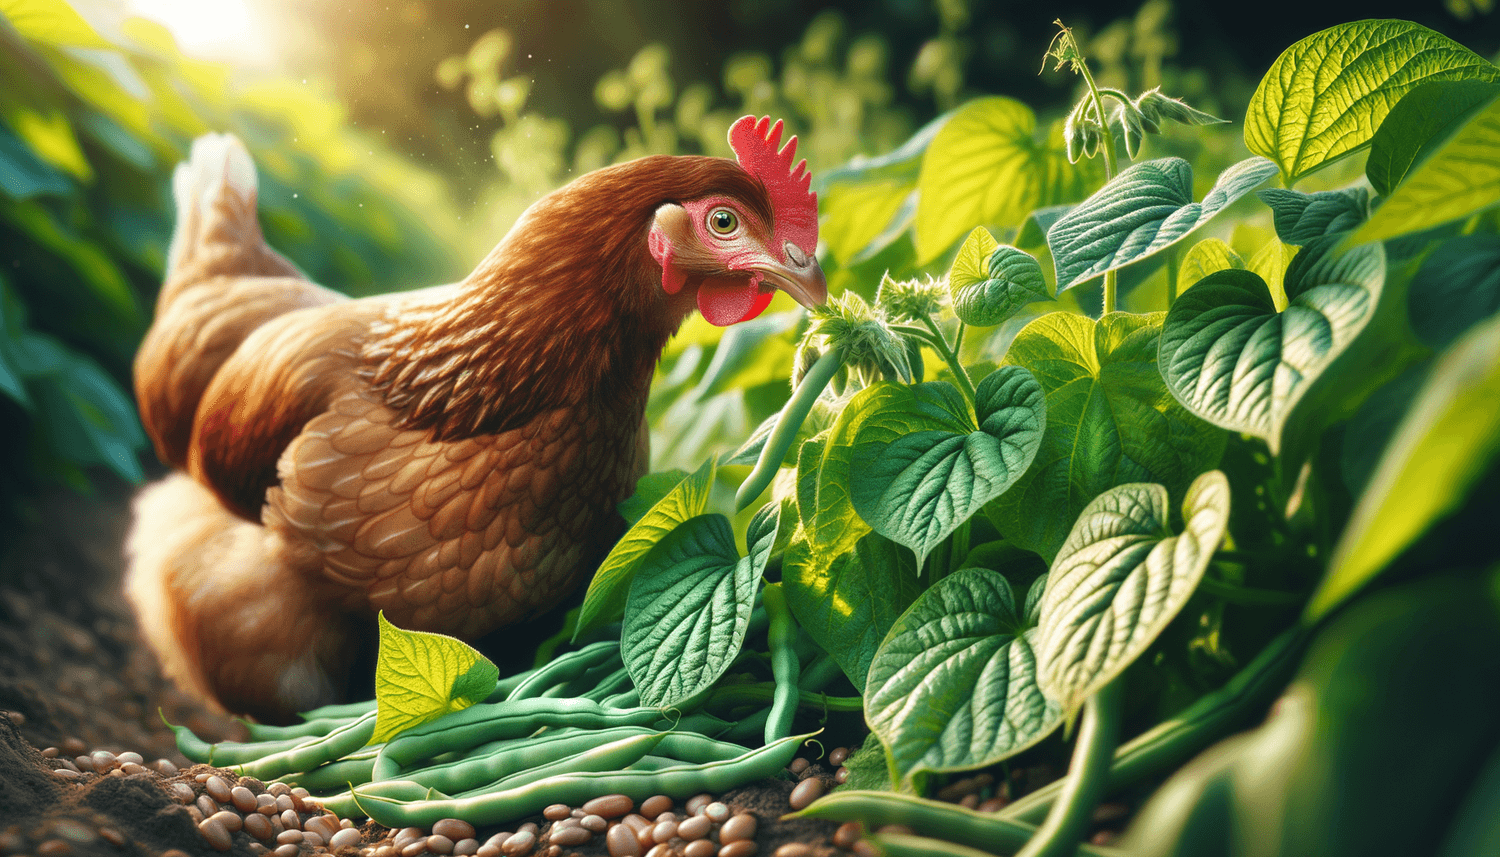 Can Chickens Eat Green Bean Leaves?